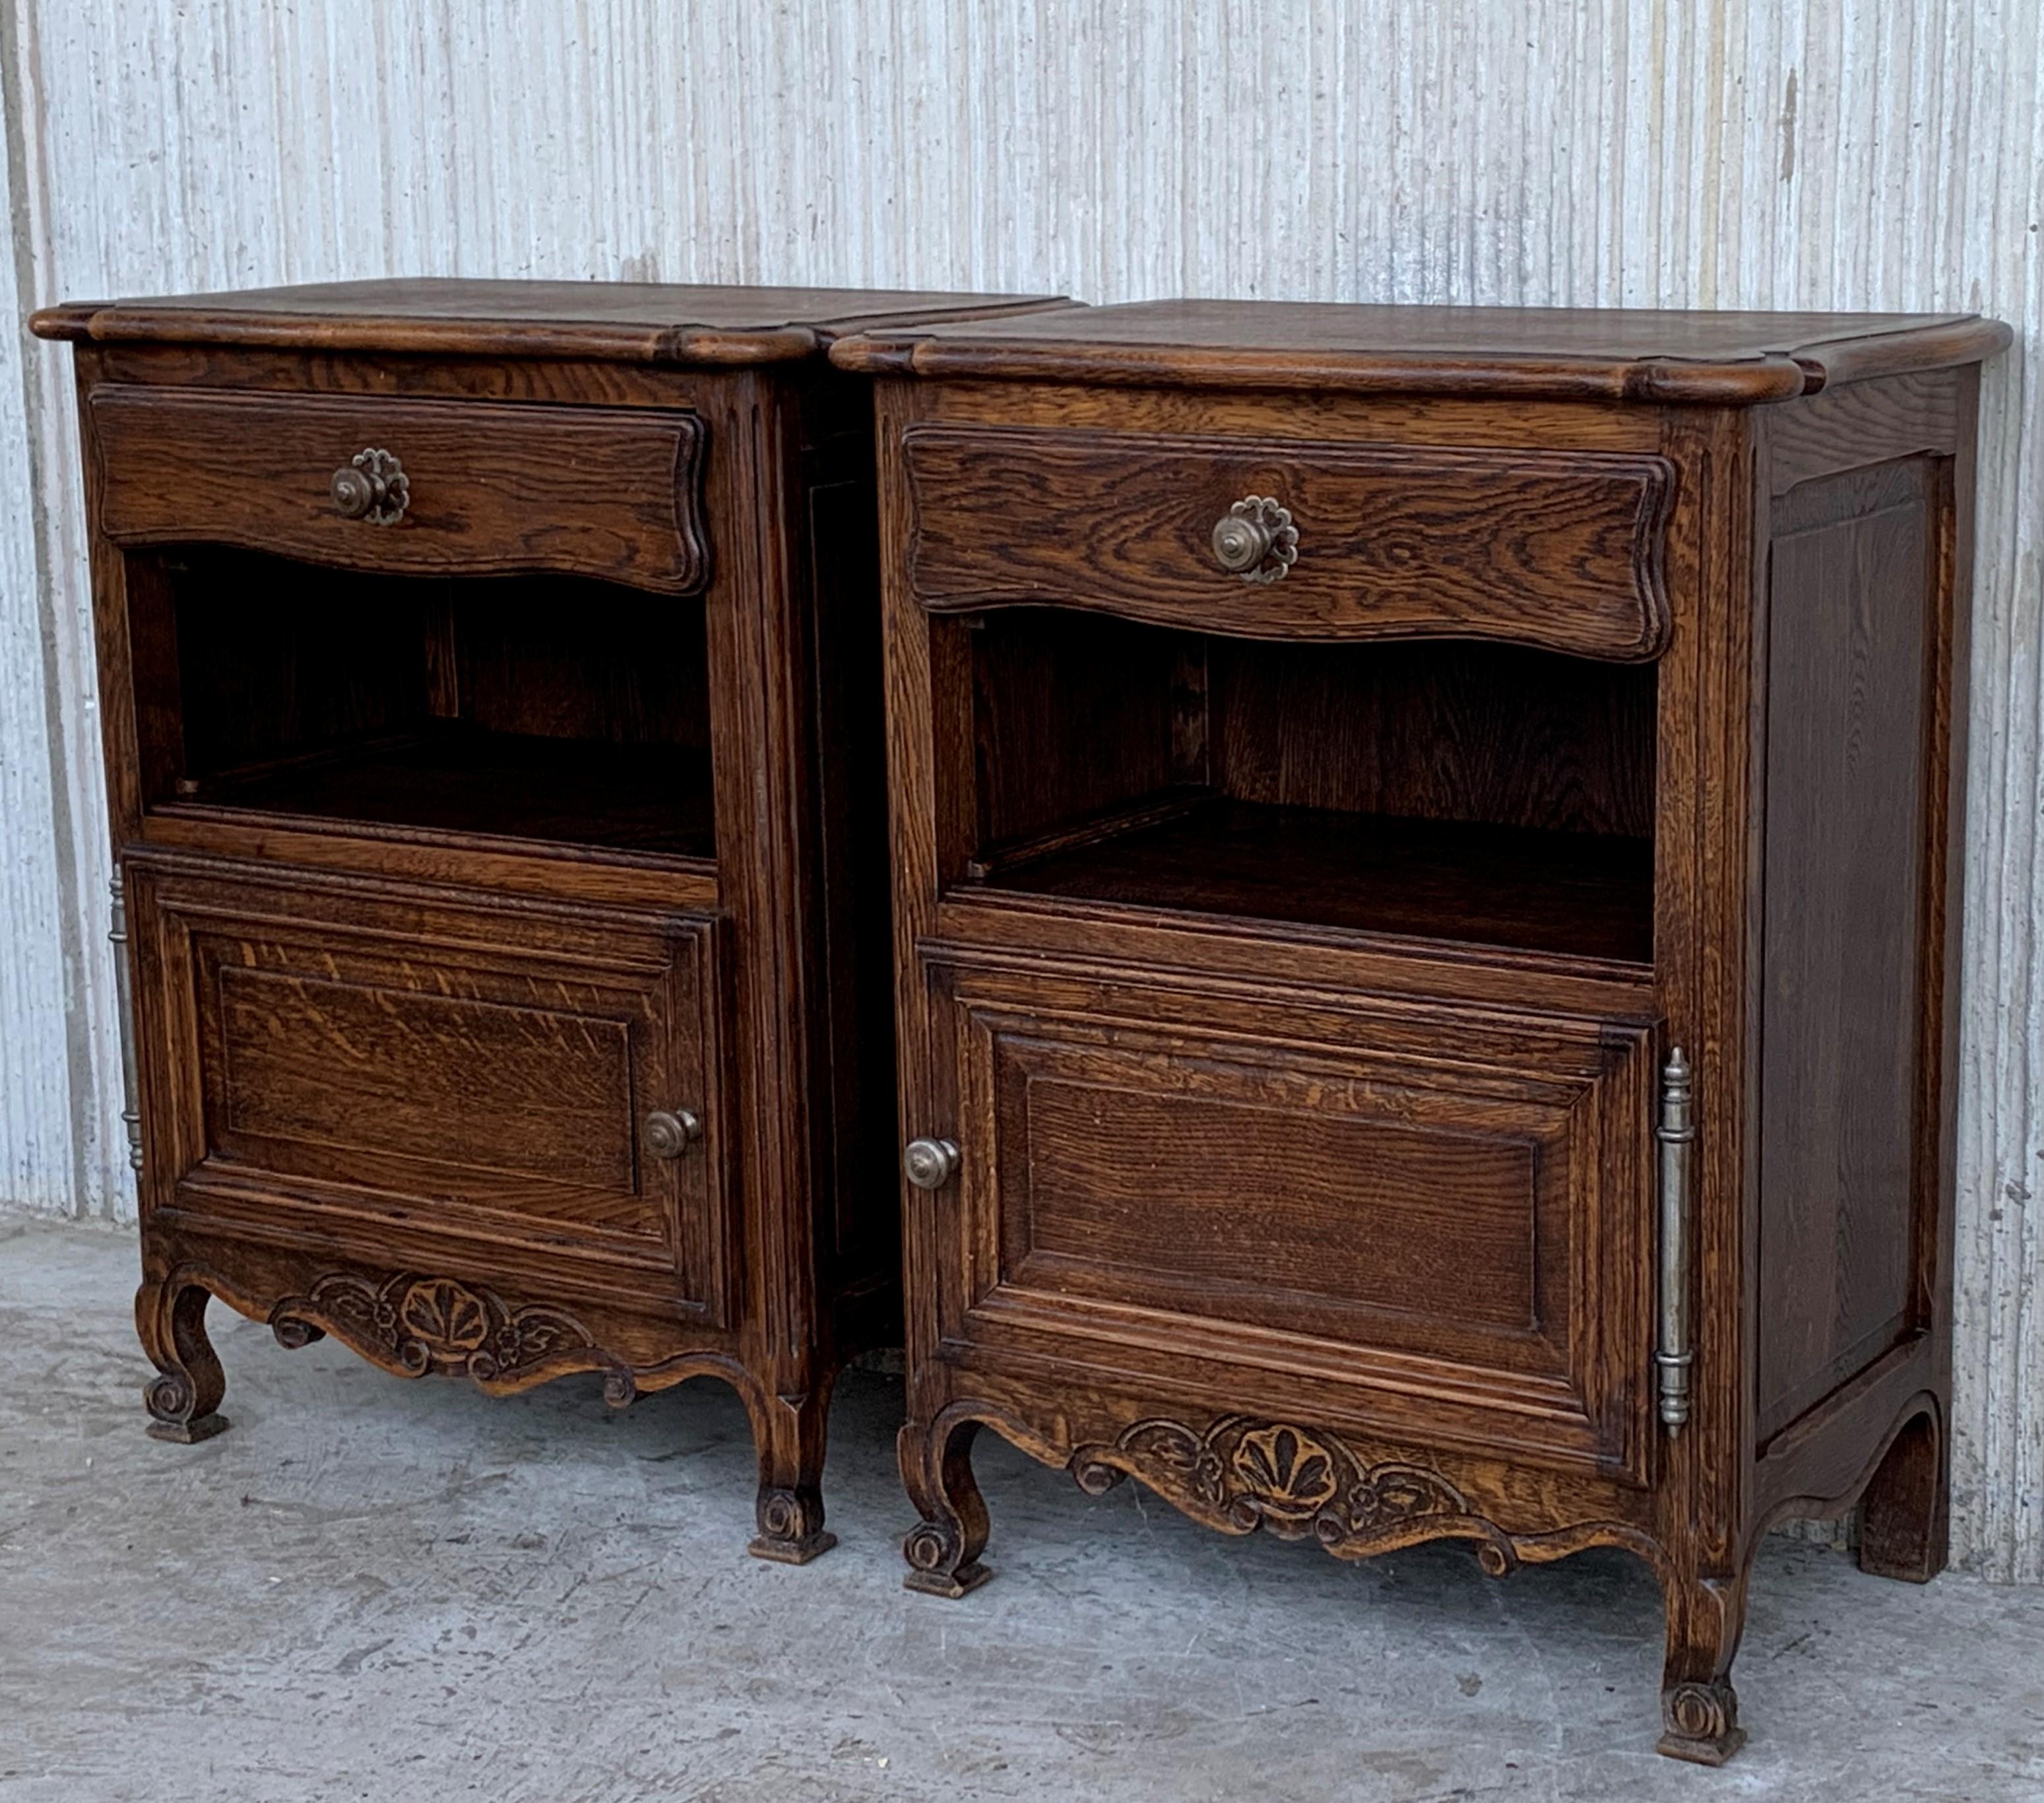 Spanish Colonial 20th Century Pair of Spanish Nightstands with Drawer, Open Shelf and Low Door